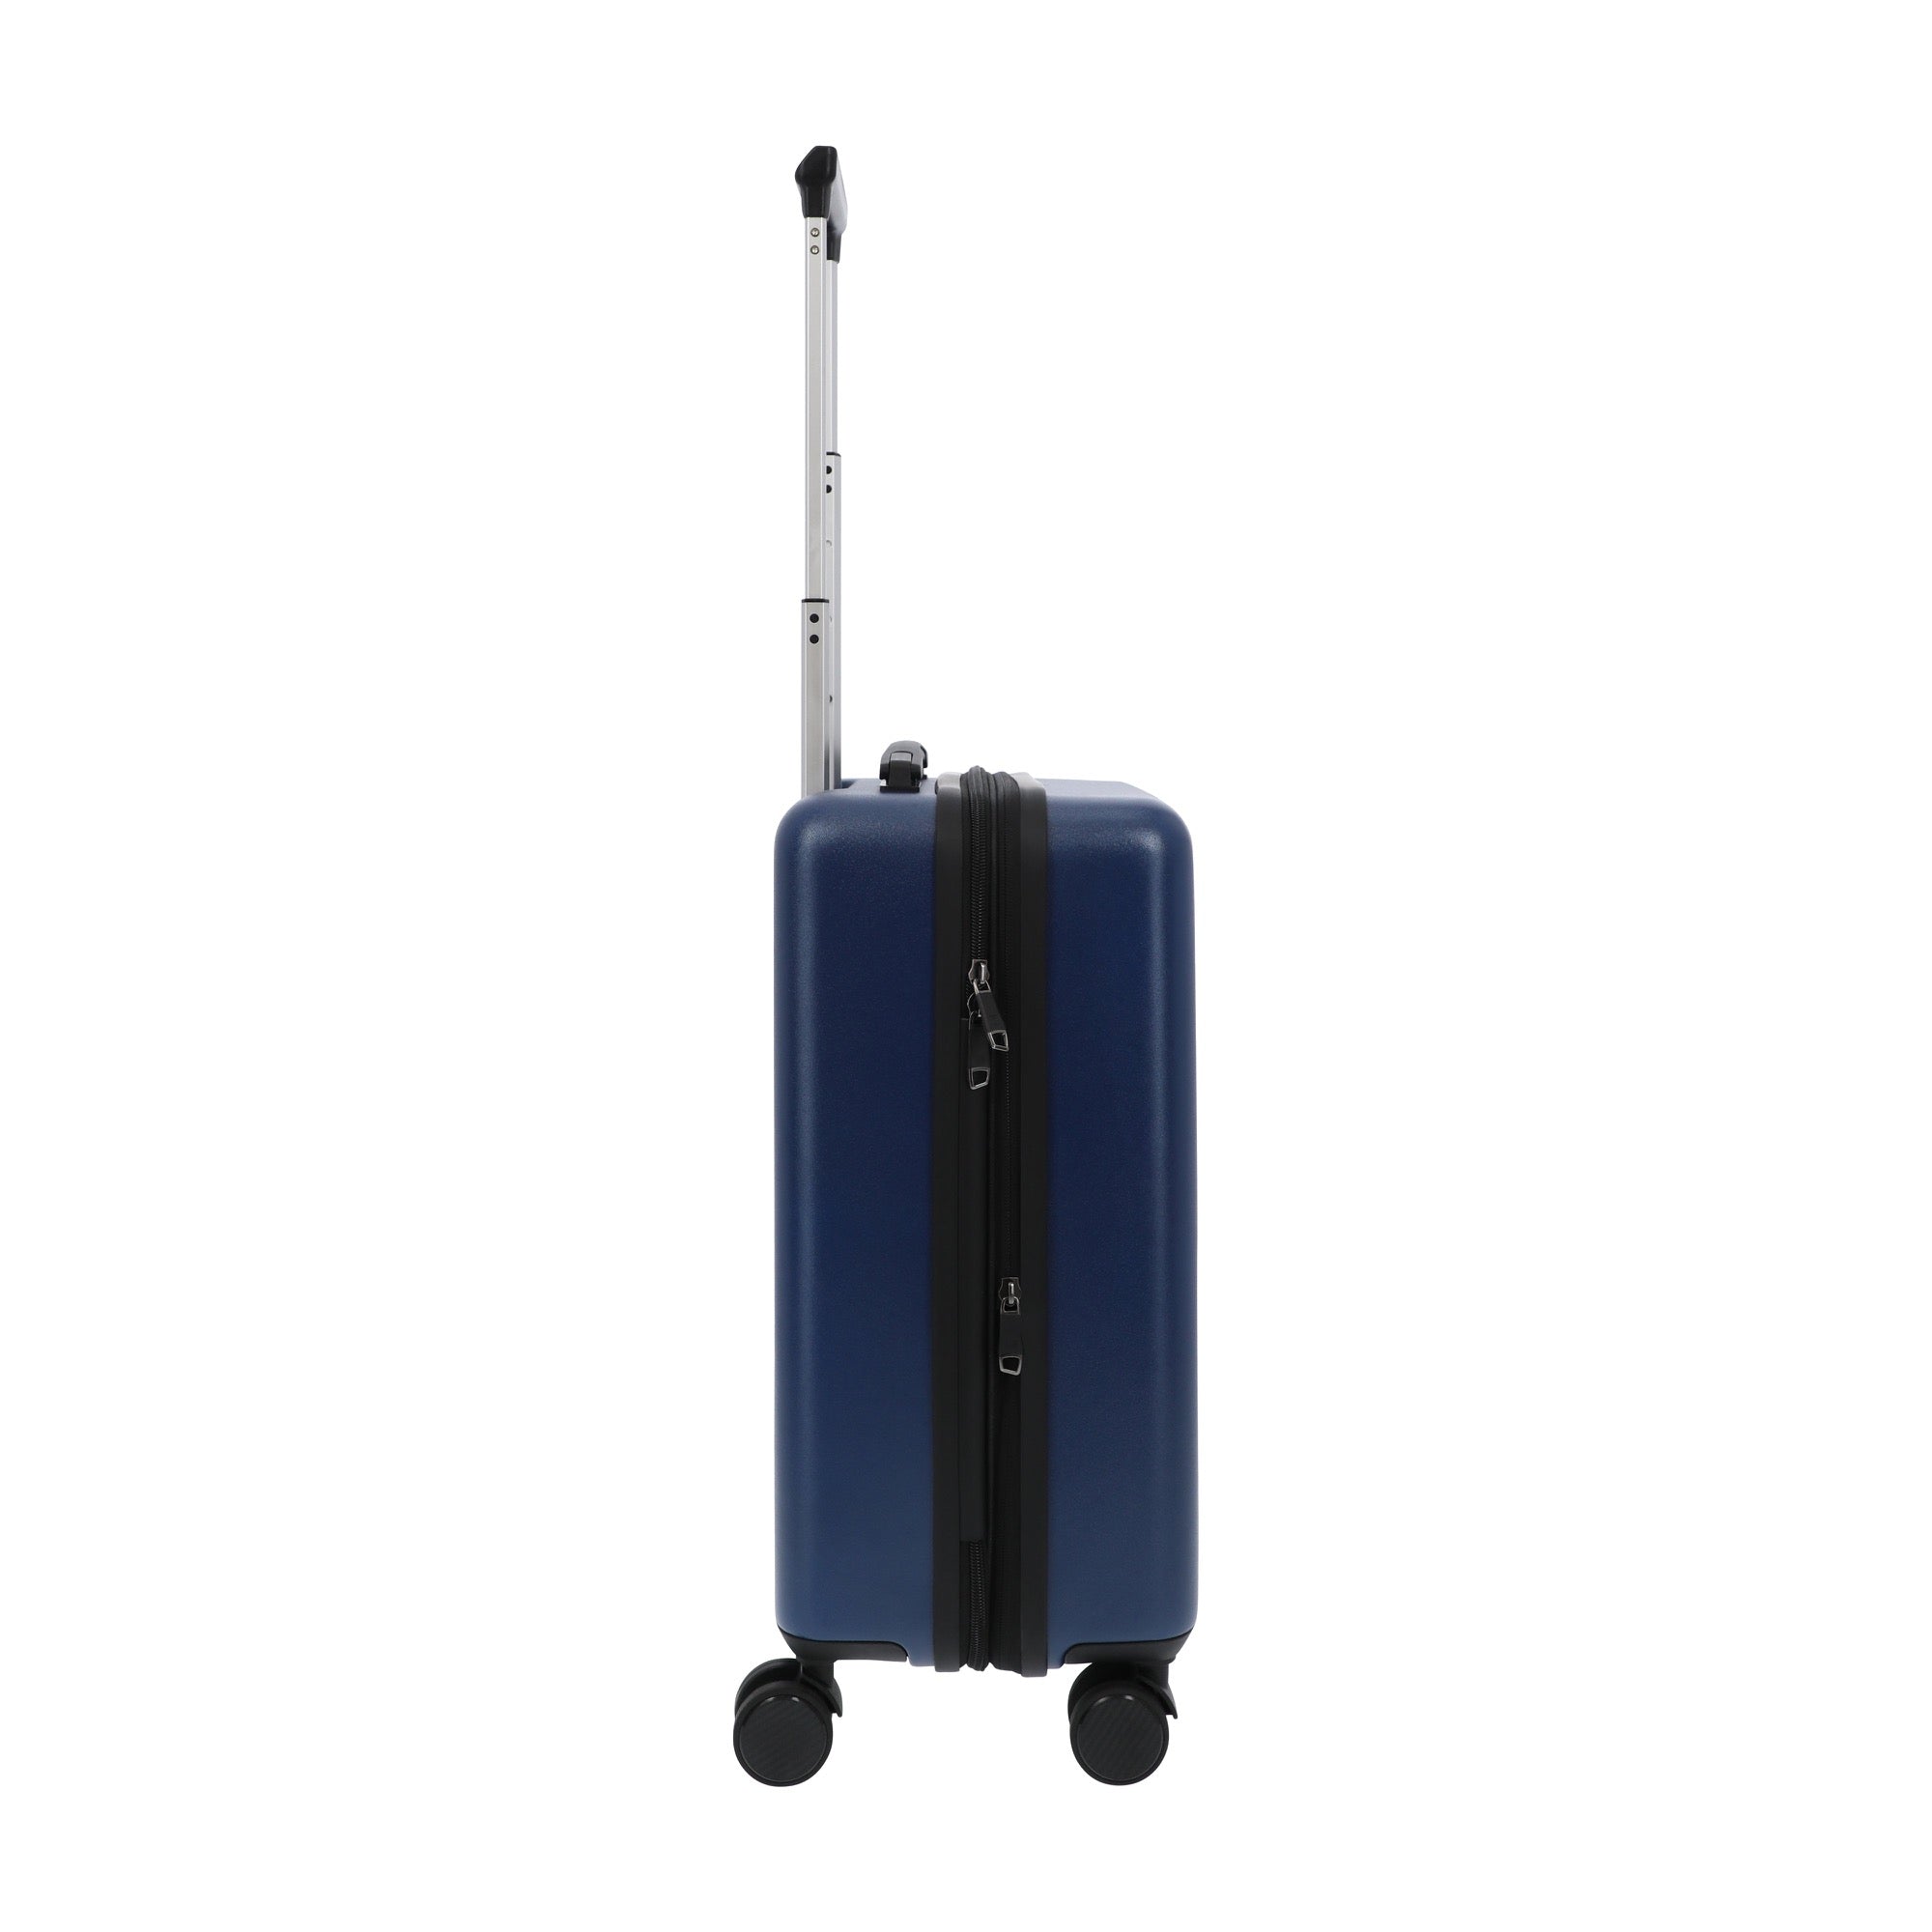 White 22.5" carry-on spinner suitcase luggage by Ful